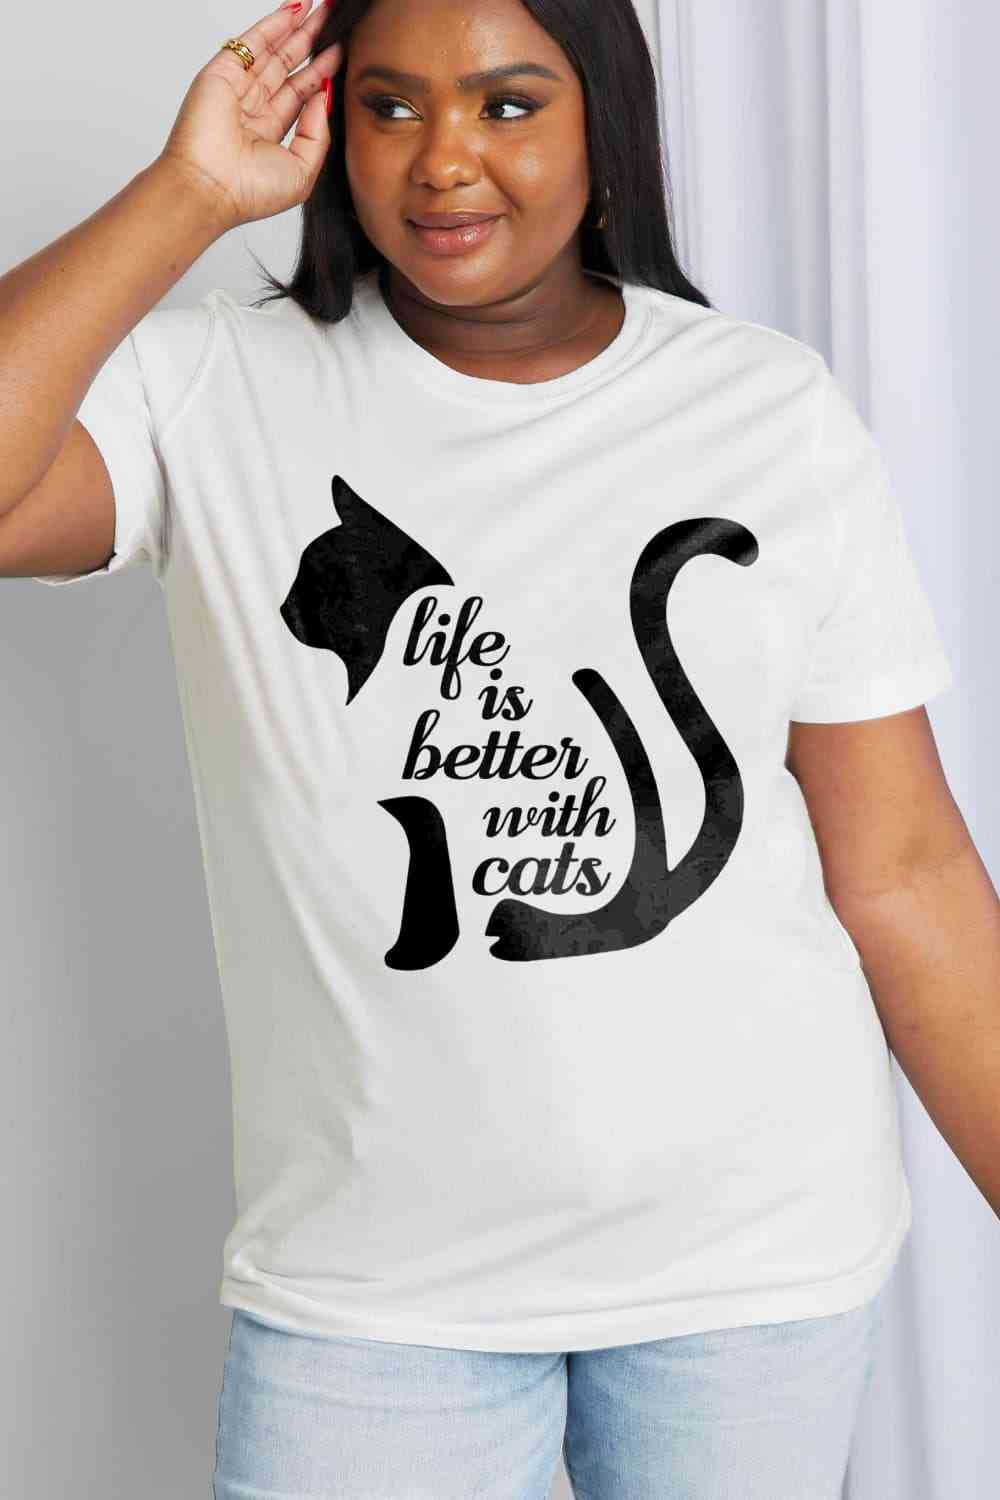 LIFE IS BETTER WITH CATS Graphic Cotton Tee - Kawaii Stop - Casual Style, Cat Dad, Cat Enthusiast, Cat Lover Tee, Cat Mom, Comfortable Fit, Confidence Booster, Everyday Wear, Fashion, Furry Companions, Graphic Cotton Tee, High-Quality Cotton, Long Length, Must-Have, Opaque Tee, Round Neck, Ship From Overseas, Short Sleeves, Simply Love, Slightly Stretchy, Stylish, T-Shirt, Versatile, Women's Tee